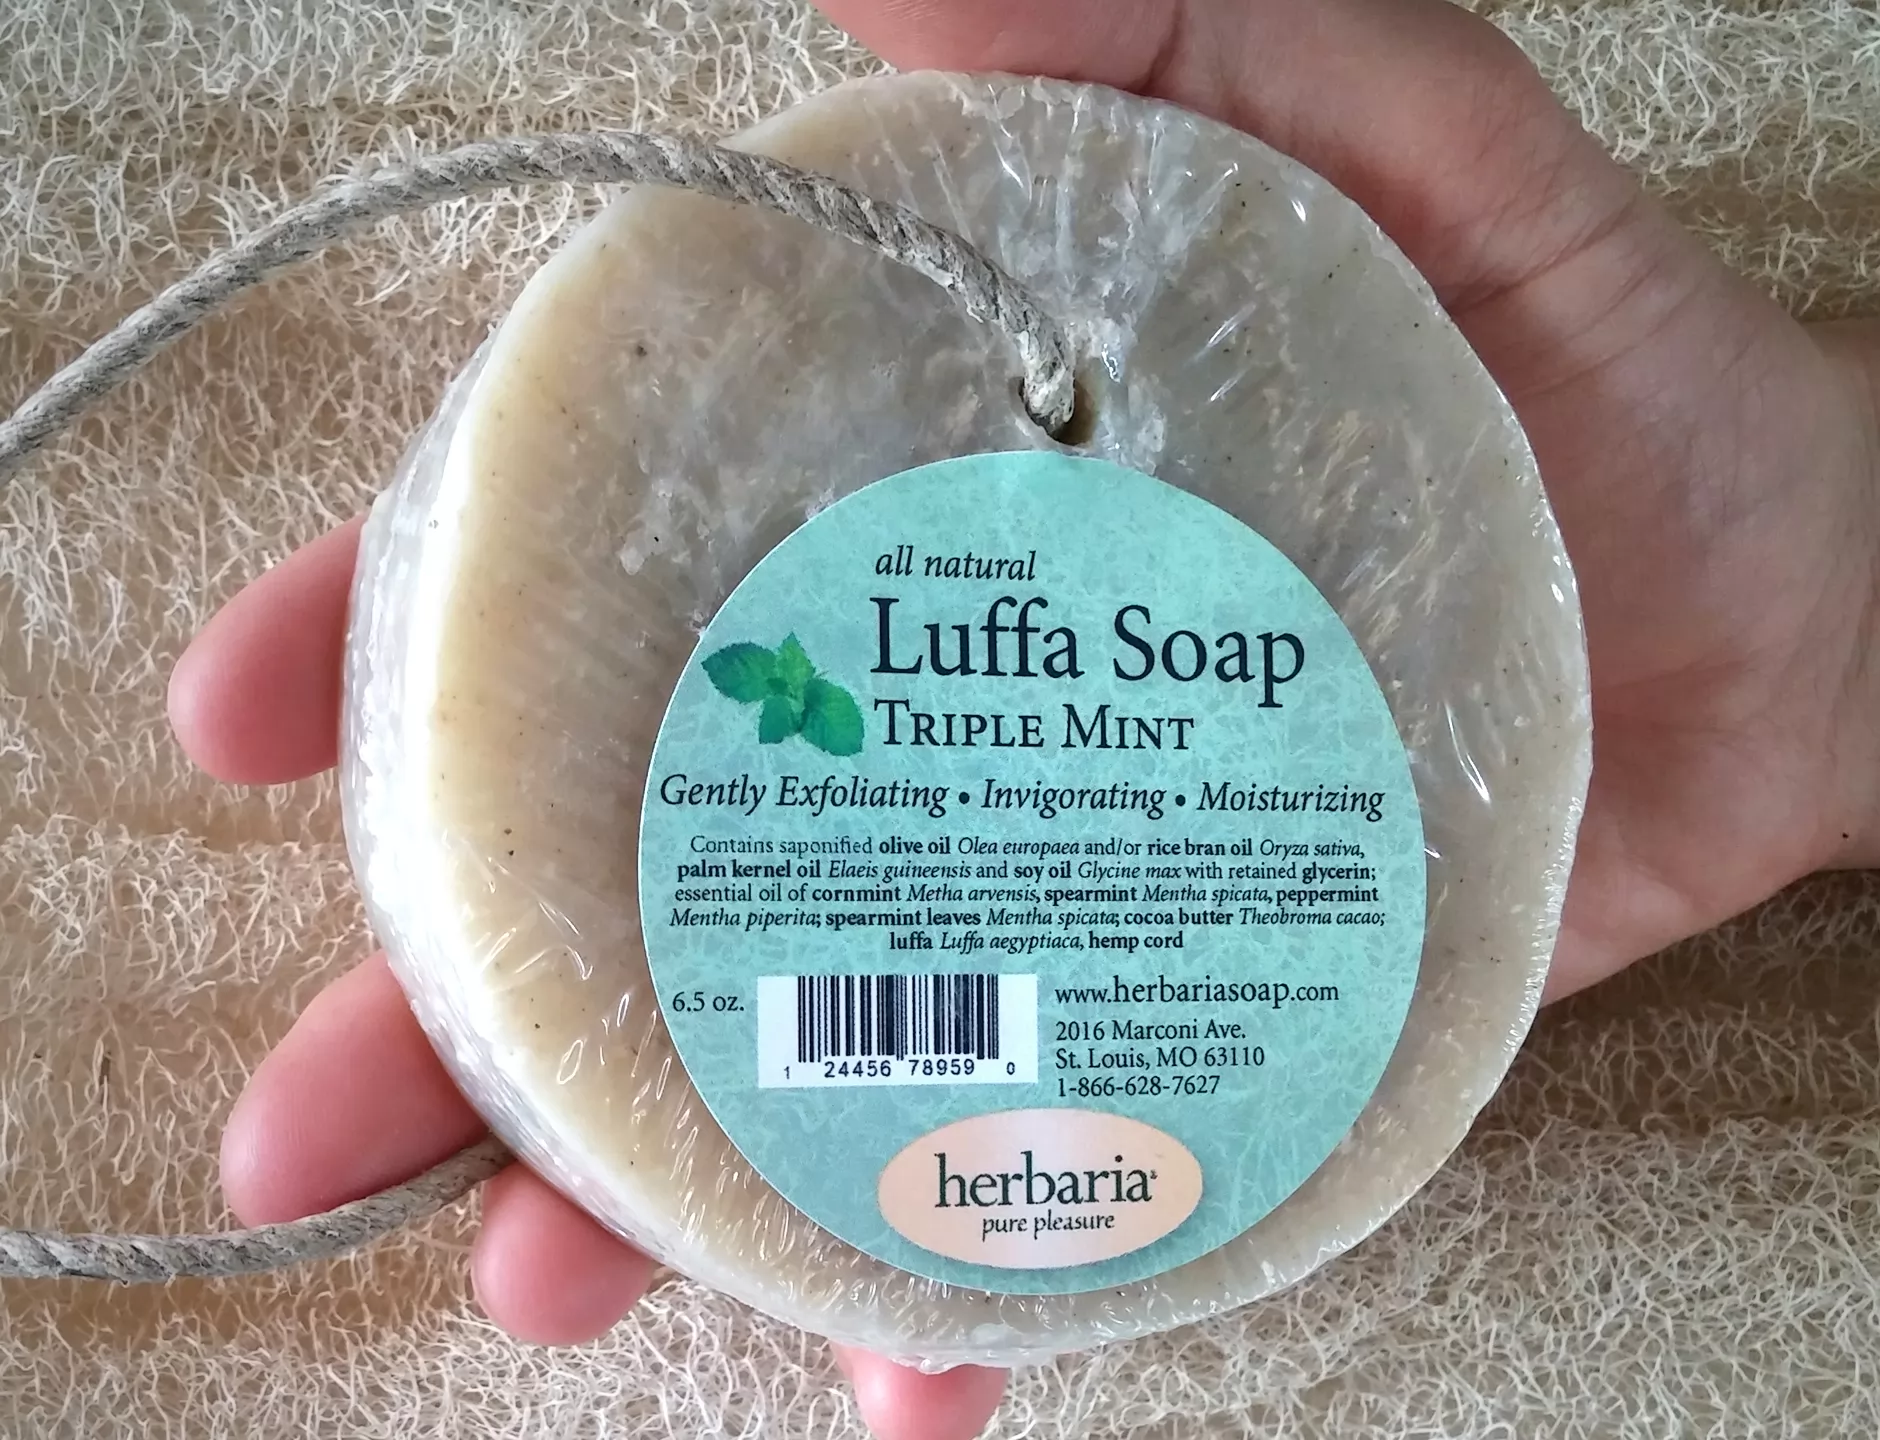 Luffa (Loofah) Soap on a Rope Handmade - All Natural